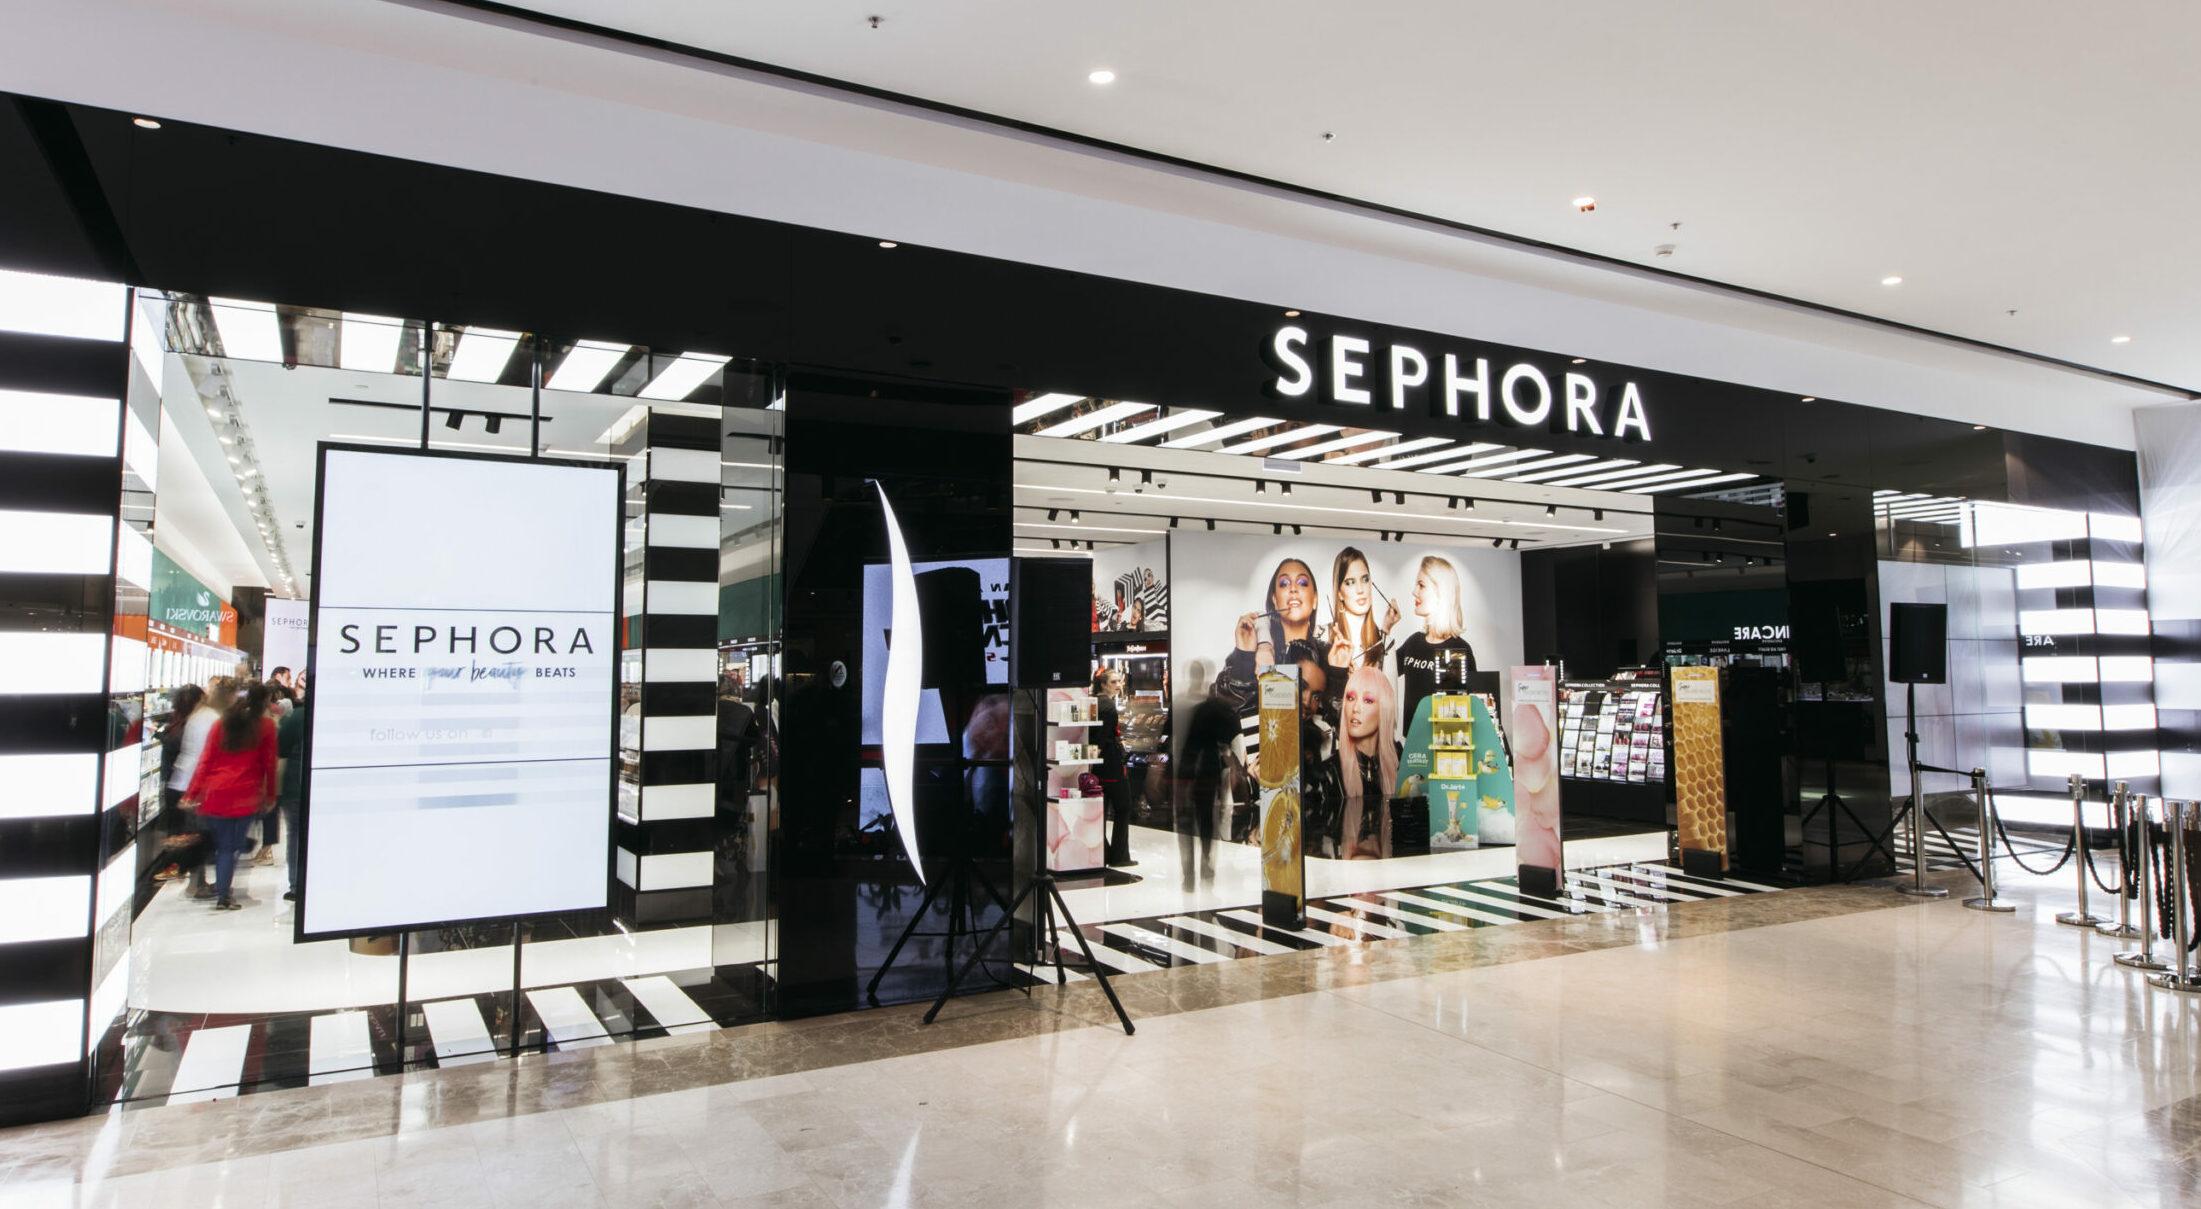 Sephora Is Opening A Store In The Perth CBD Next Week